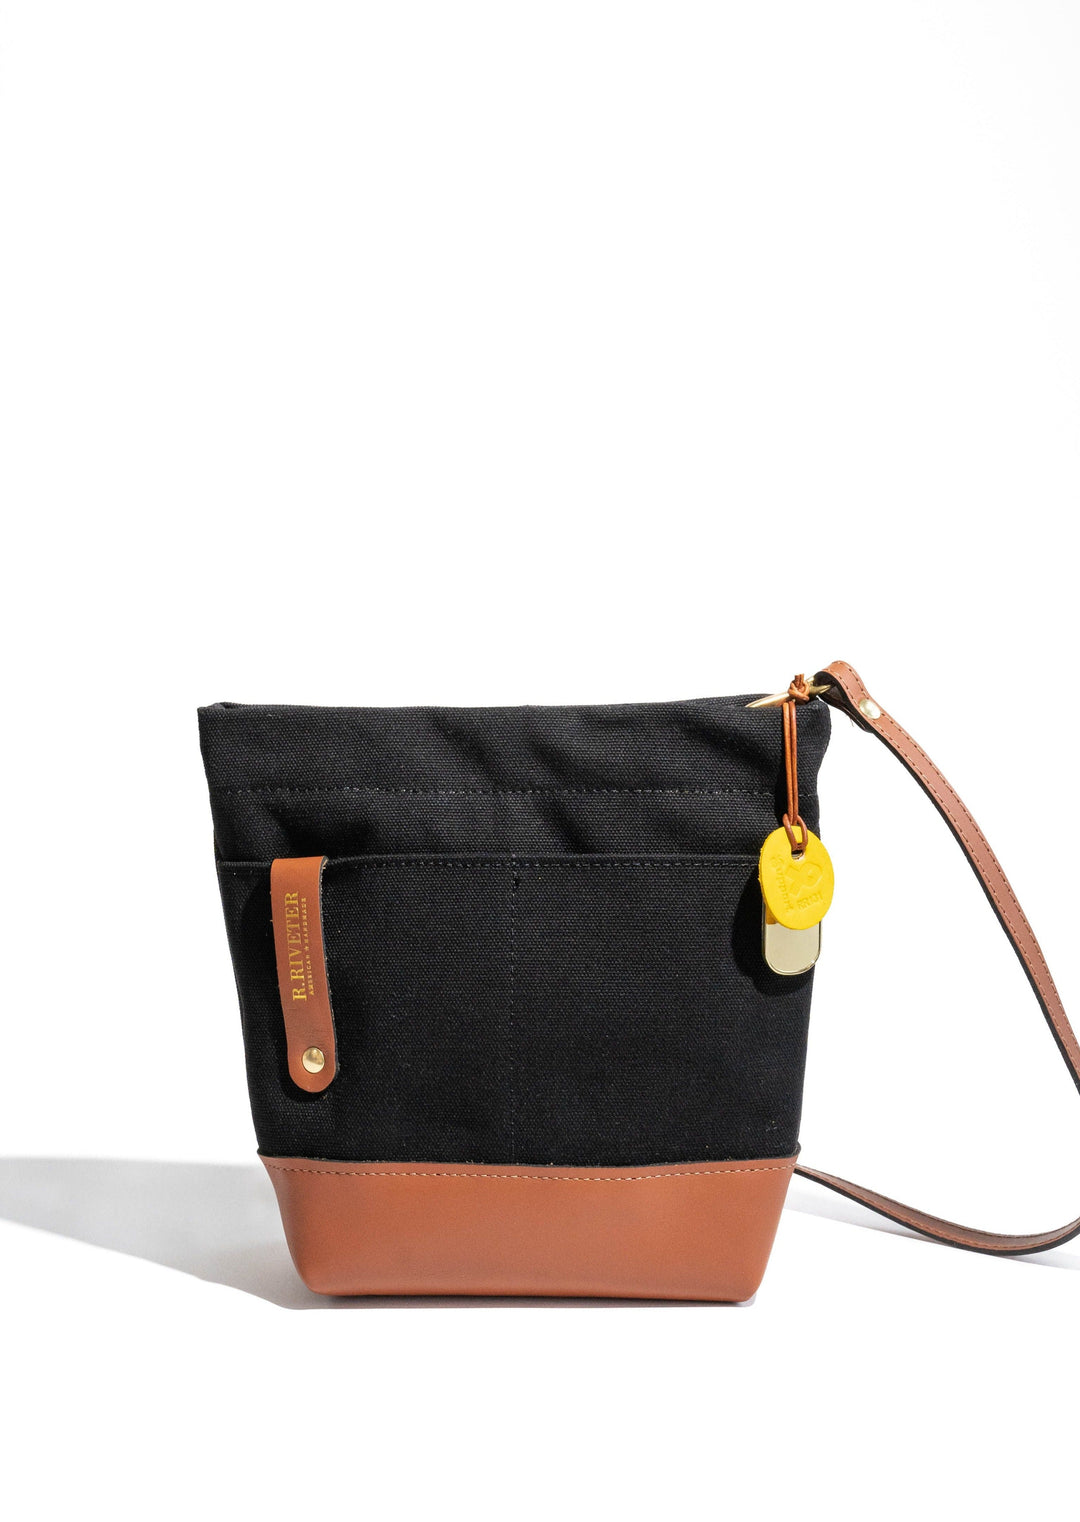 Betsy | Signature Black Canvas + Tan Leather